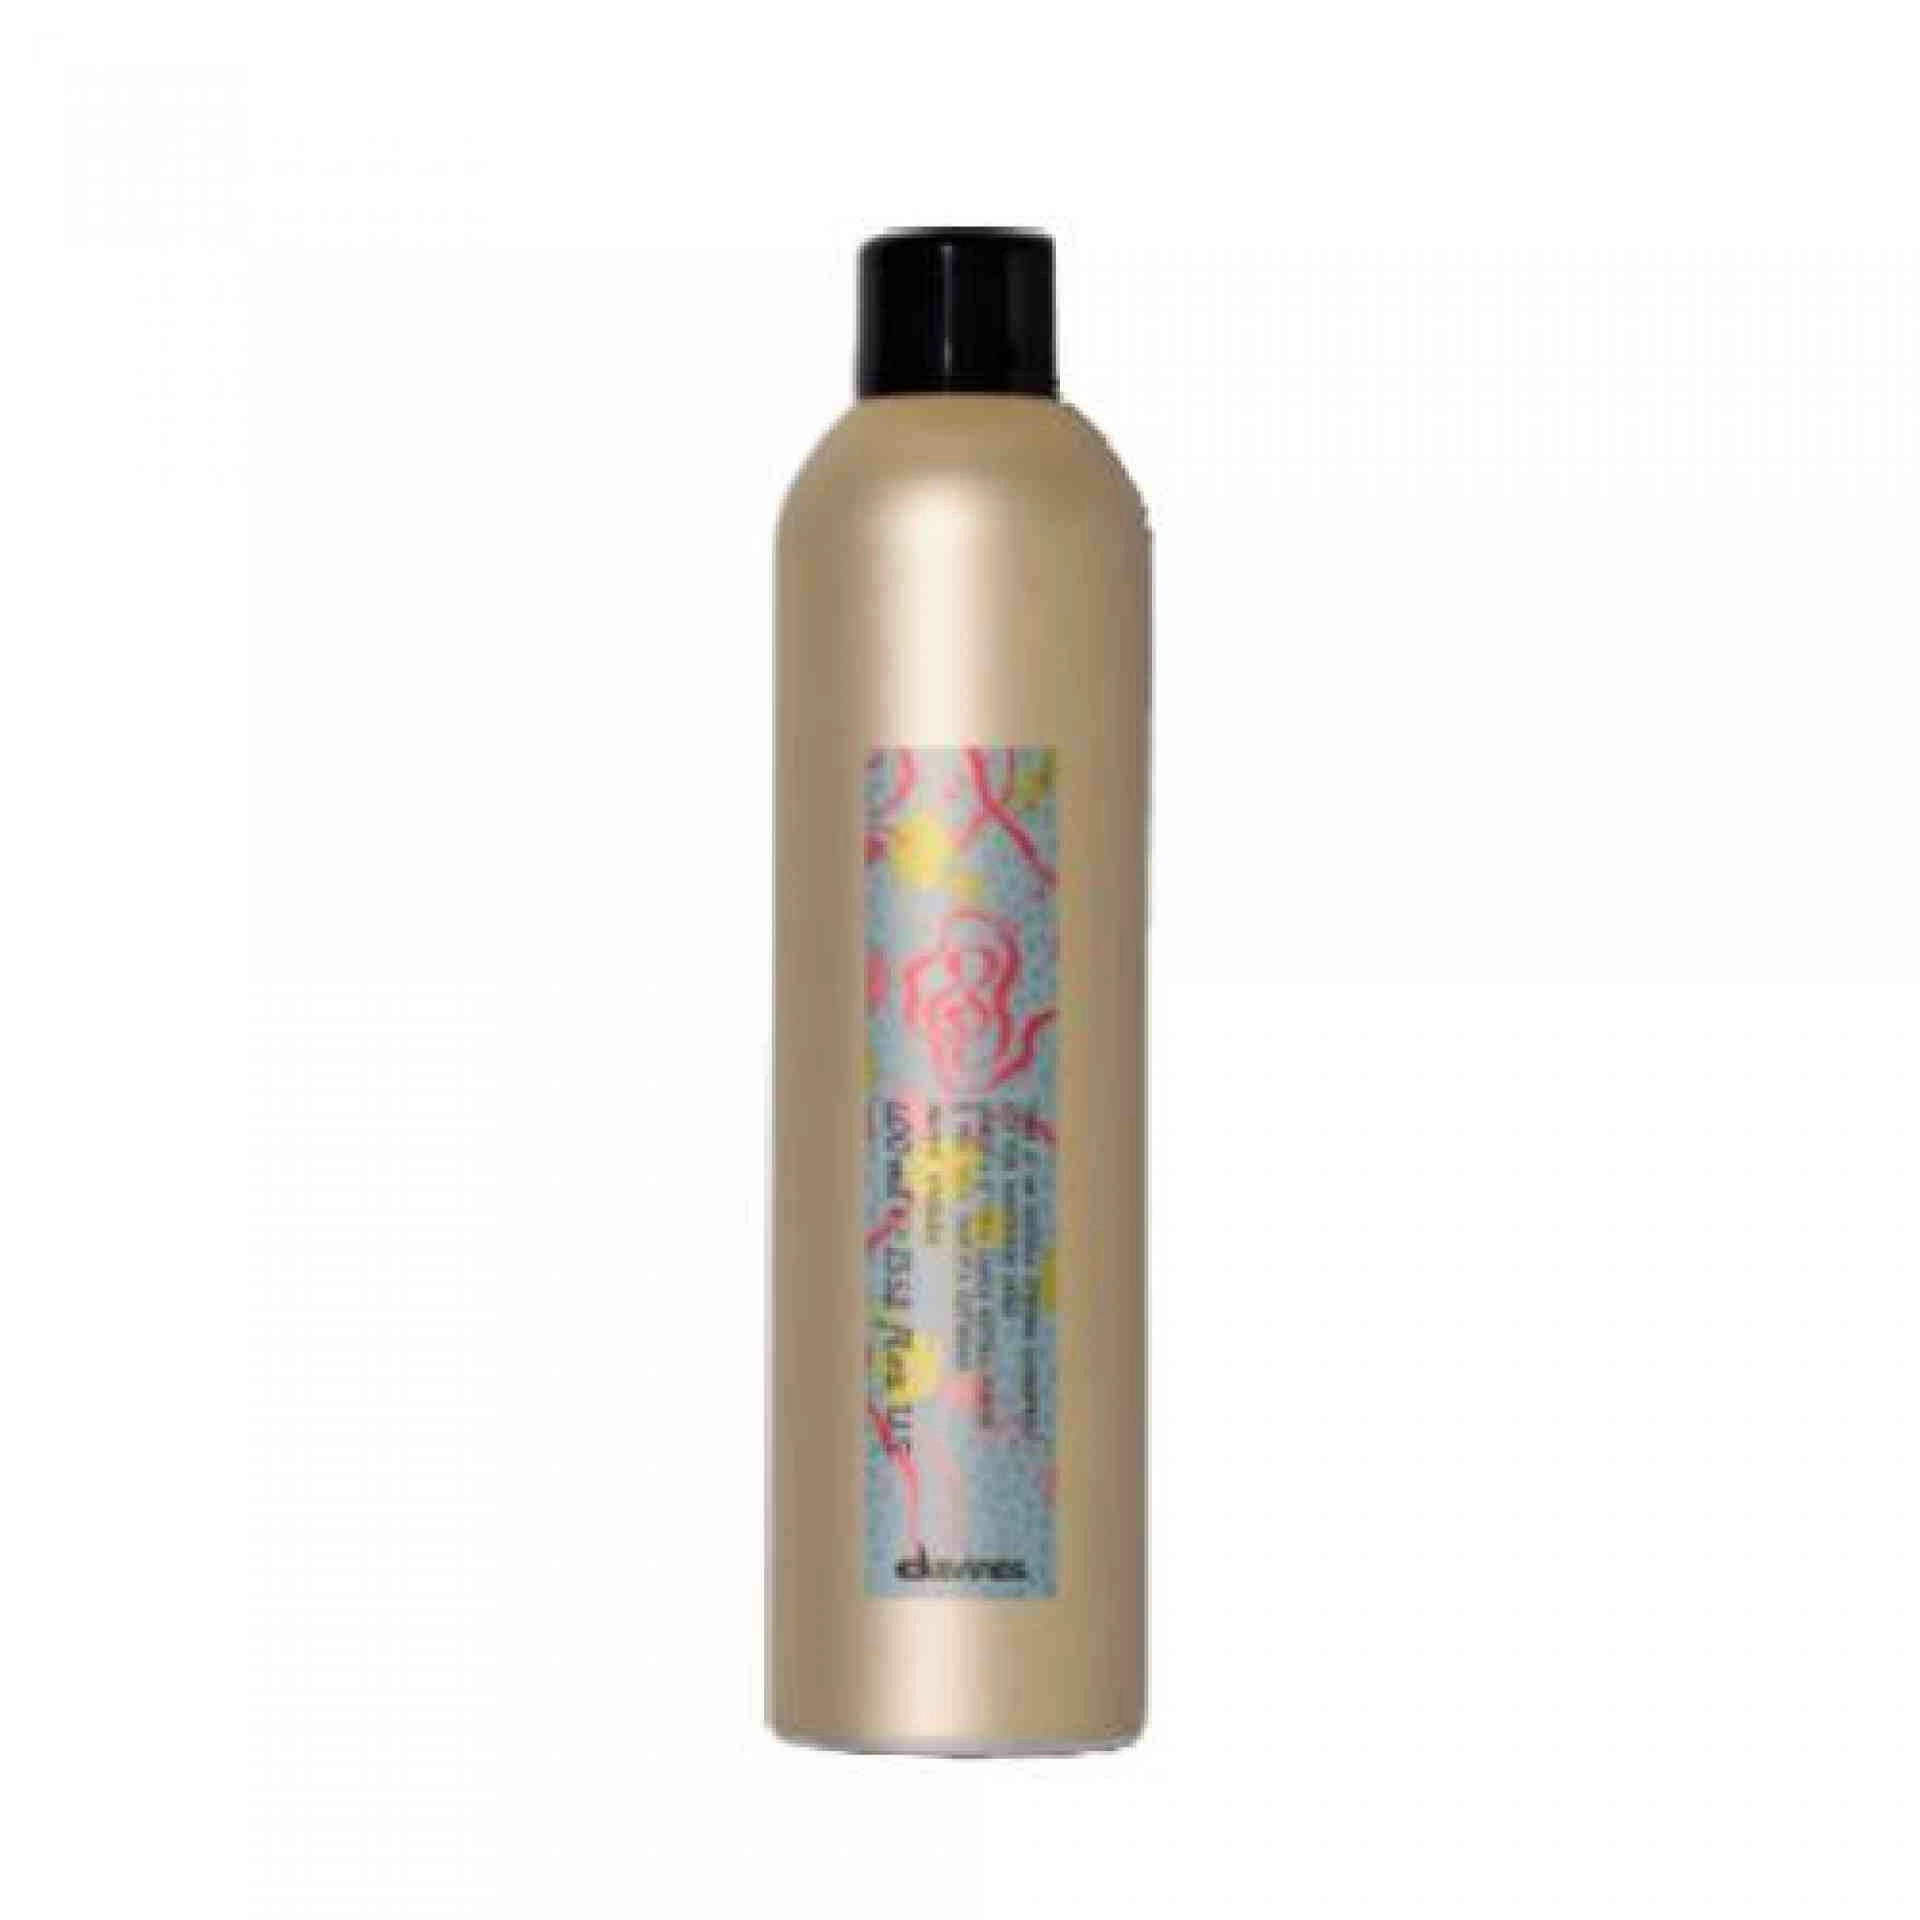 MI Extra-Strong Hold Hair-Spray | Laca invisible extra fuerte 400ml - More Inside - Davines ®